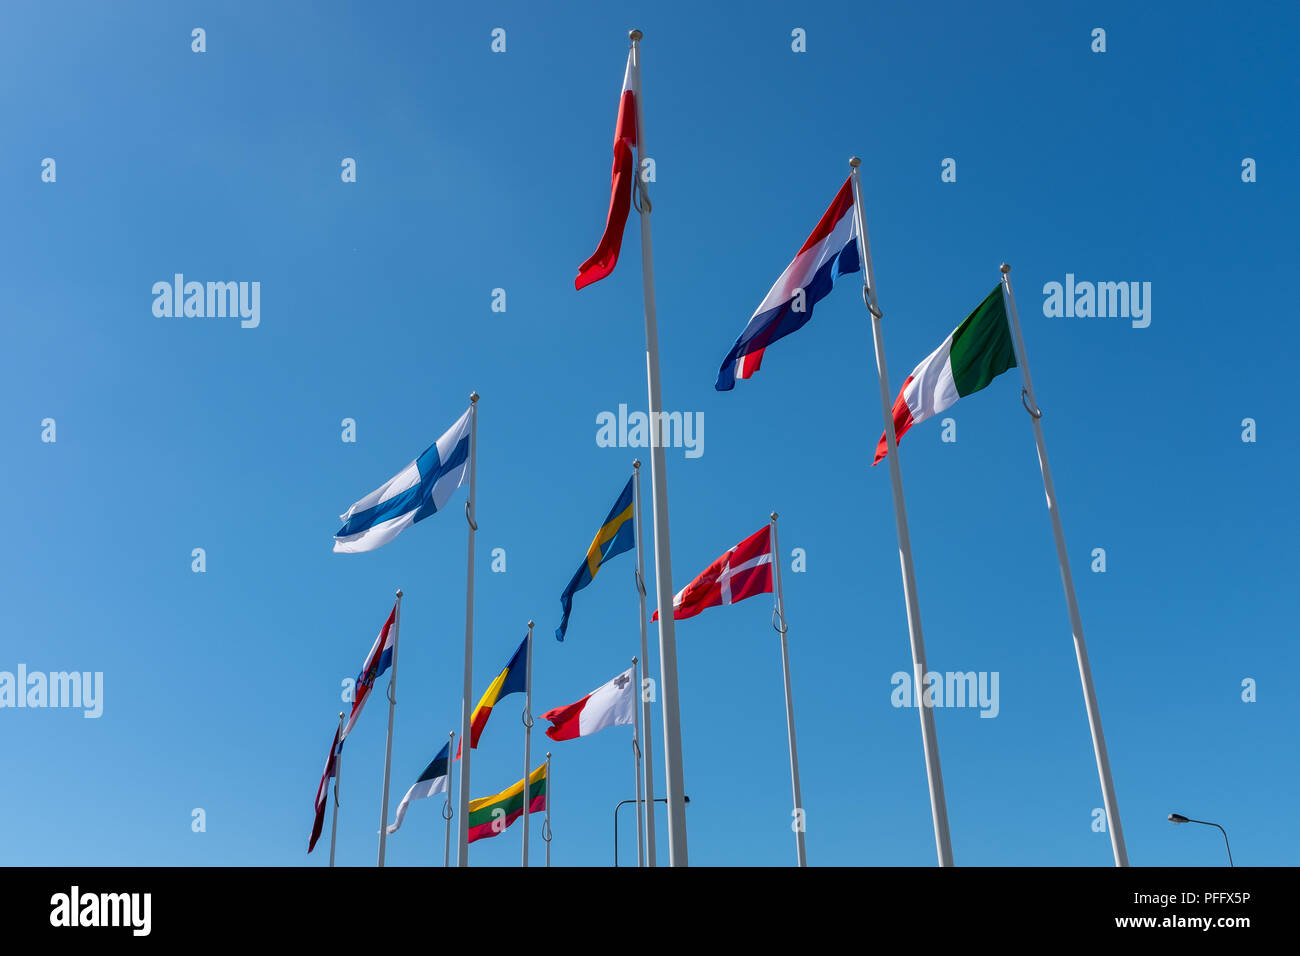 Image of Kingston Upon Hull UK City of Culture 2017. Shown around Humber Dock and Marina are the flags of different nations and baots docked. Stock Photo